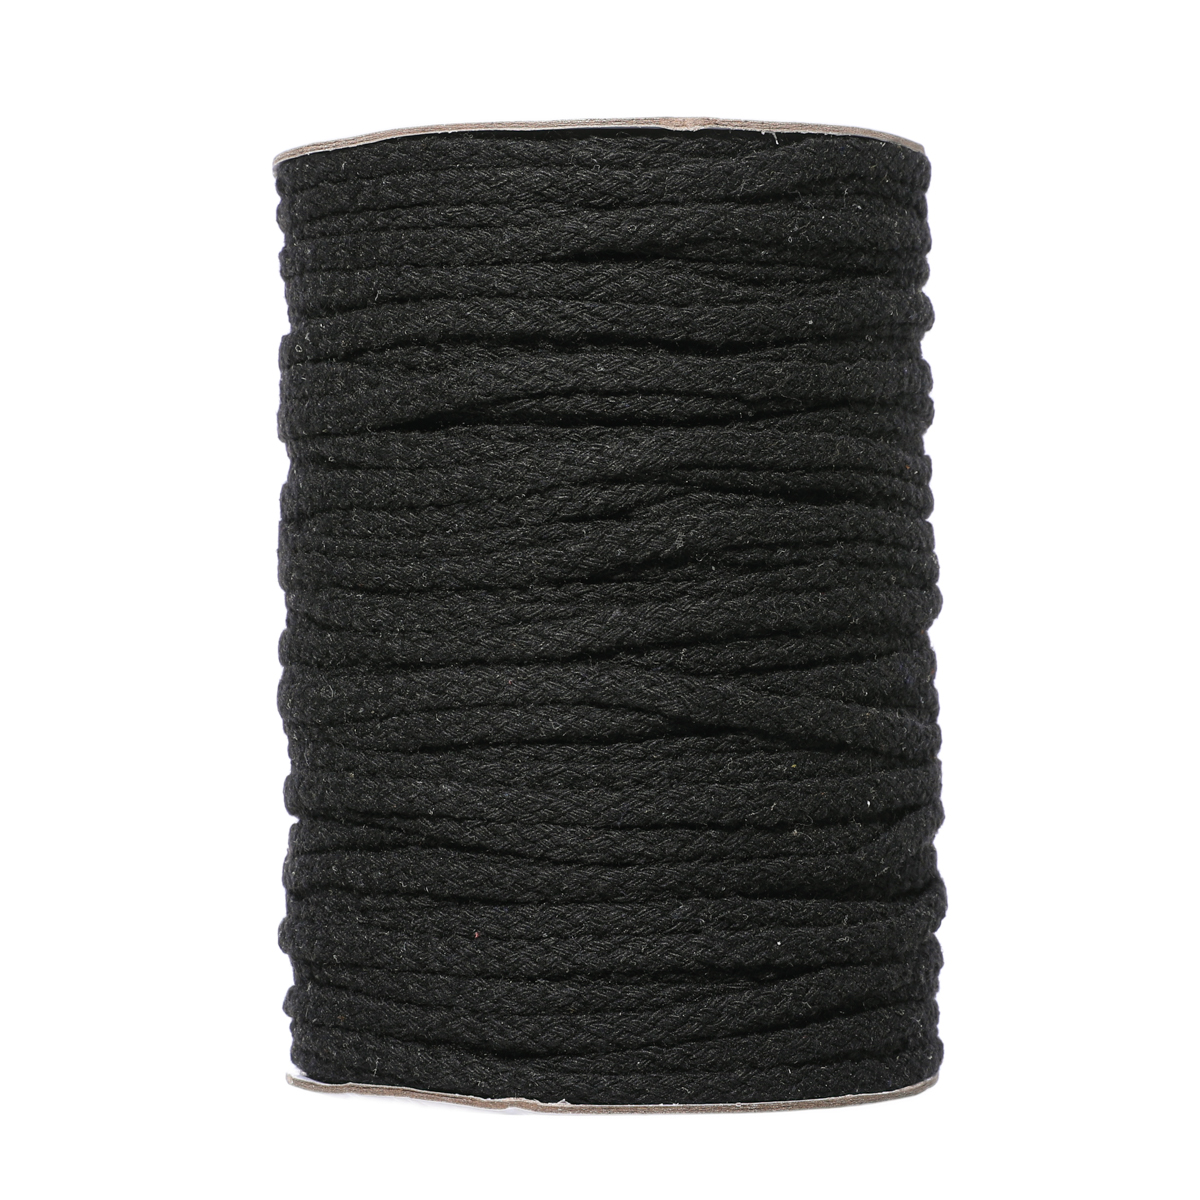 Jeteven Macrame Cord, 5mm 328 Feet Natural Cotton Macrame Rope for ...